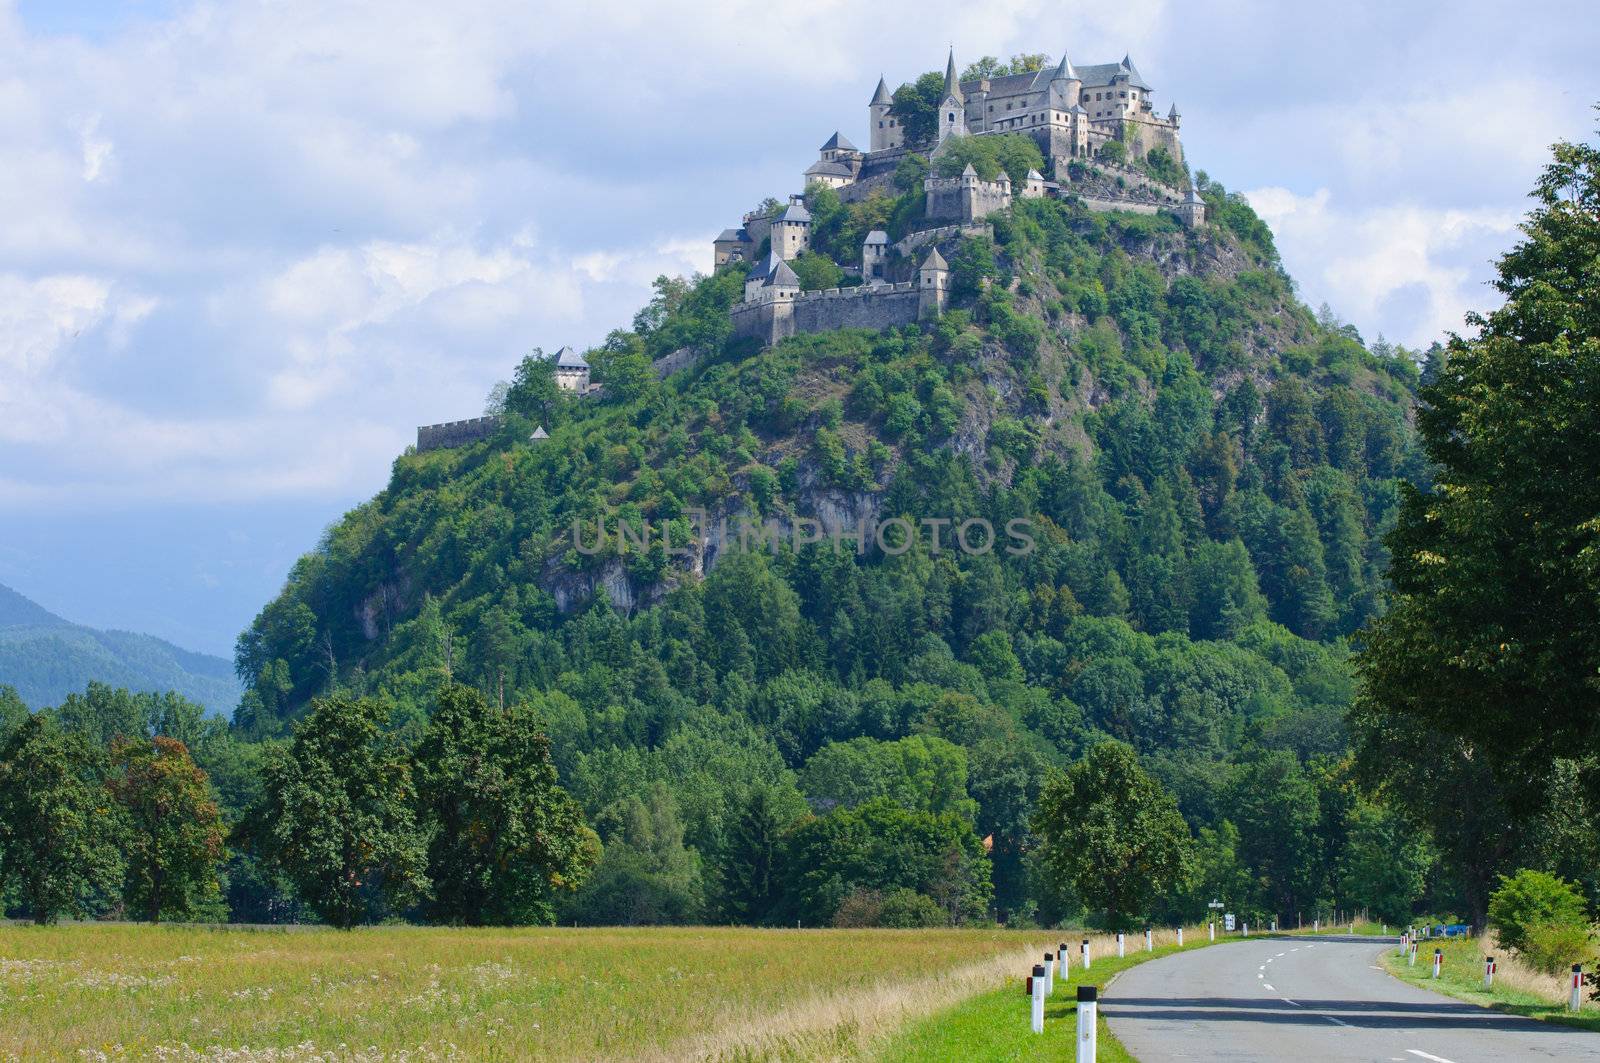 Big medieval castle Hohostervits, located on the mountain, Austria, K�rnten